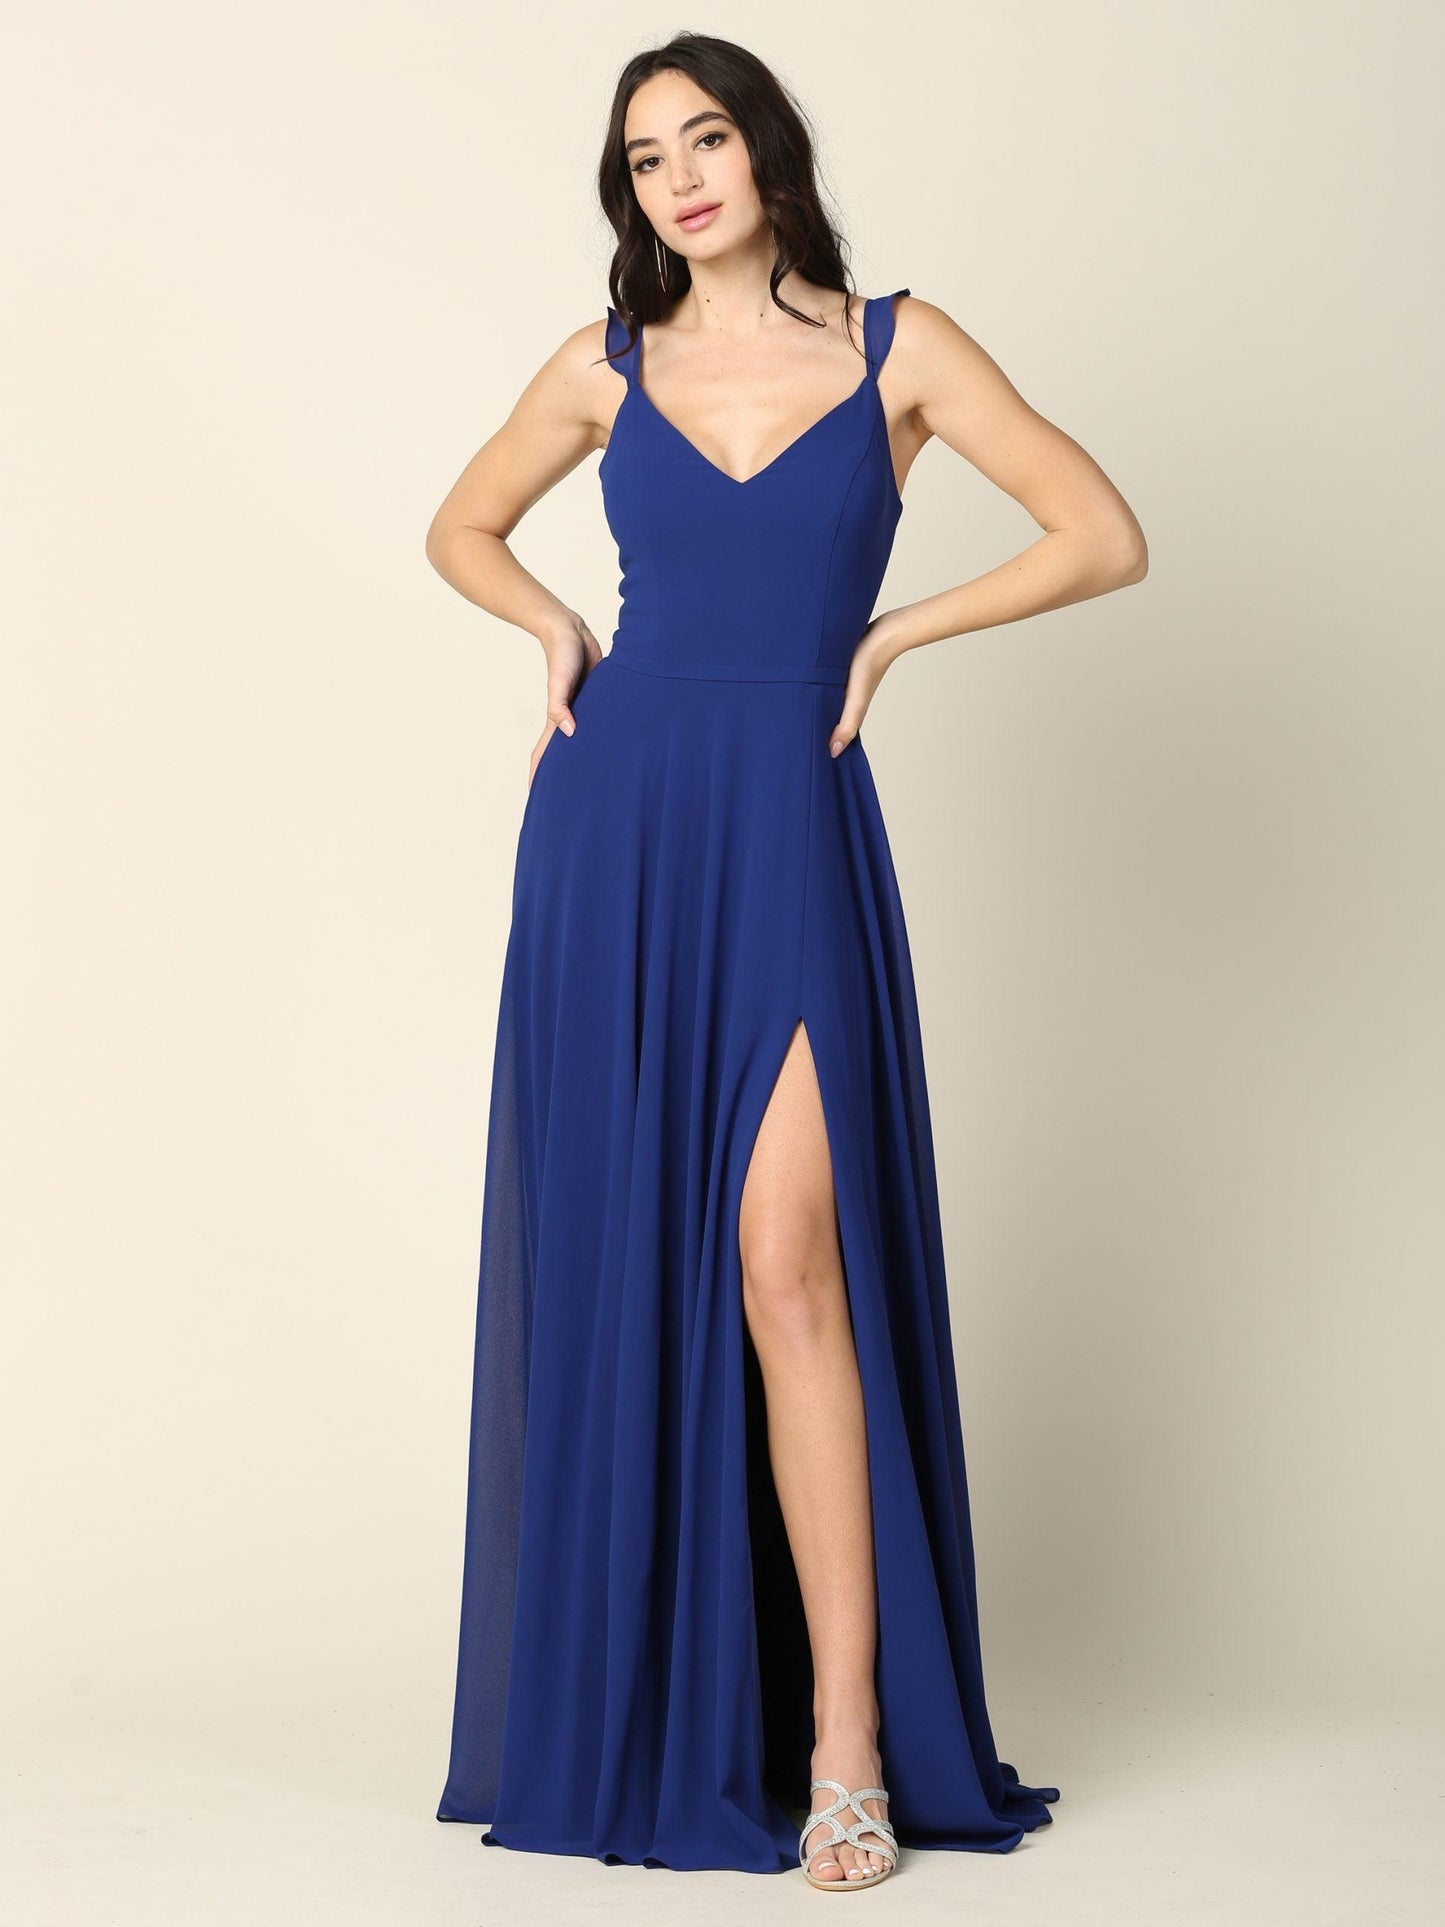 Long Bridesmaids Ruffle Sleeve Chiffon Gown - The Dress Outlet